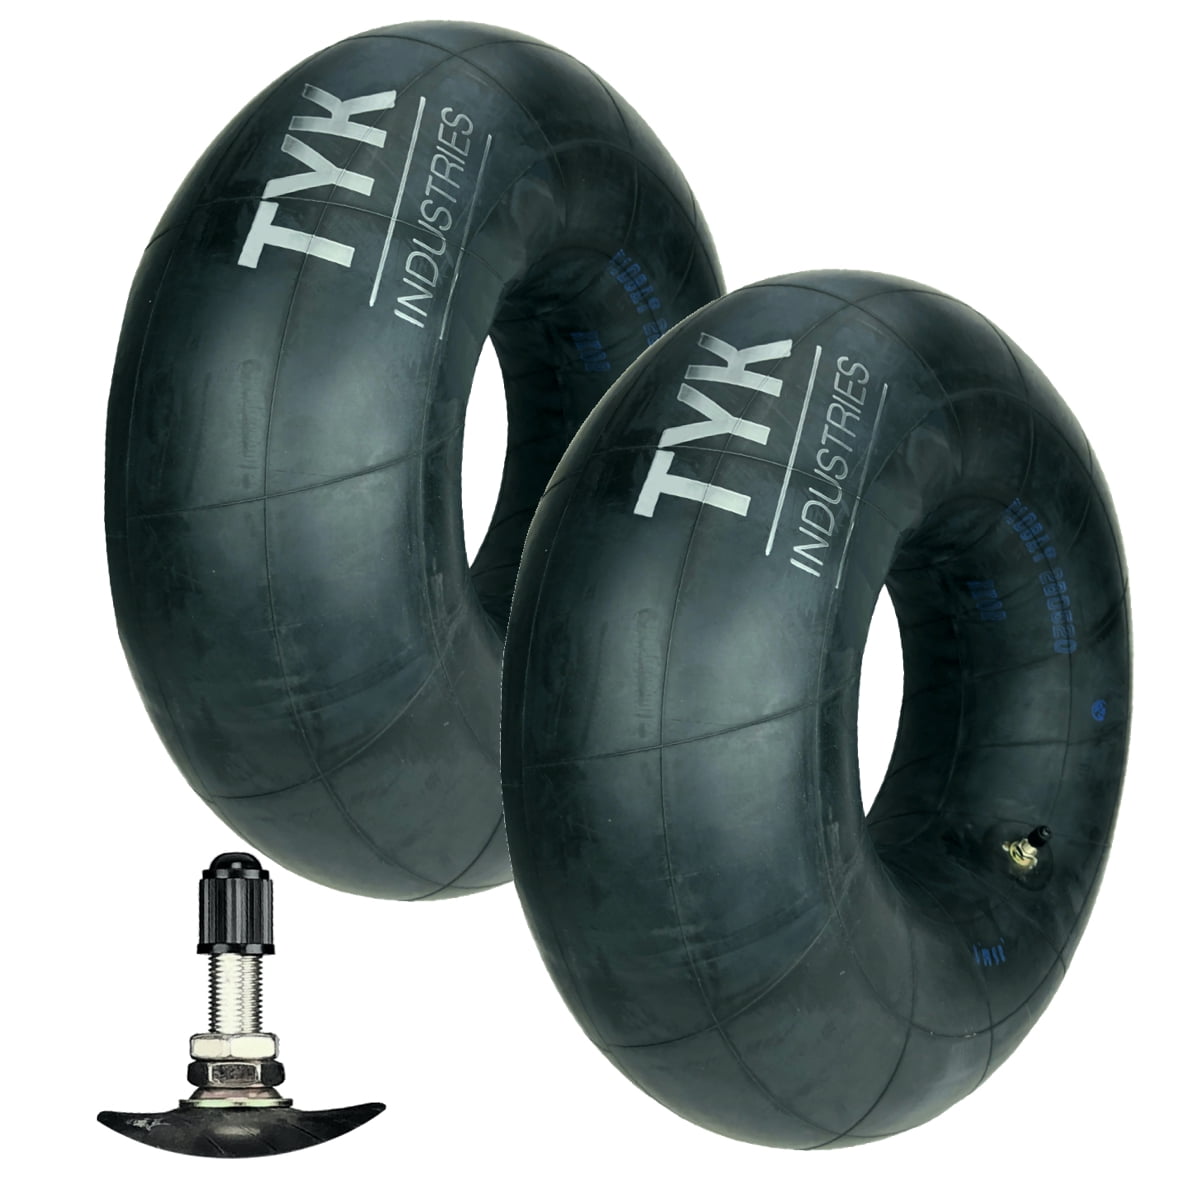 TWO 18x8.5-8 Lawn Mower Tire Inner Tubes 